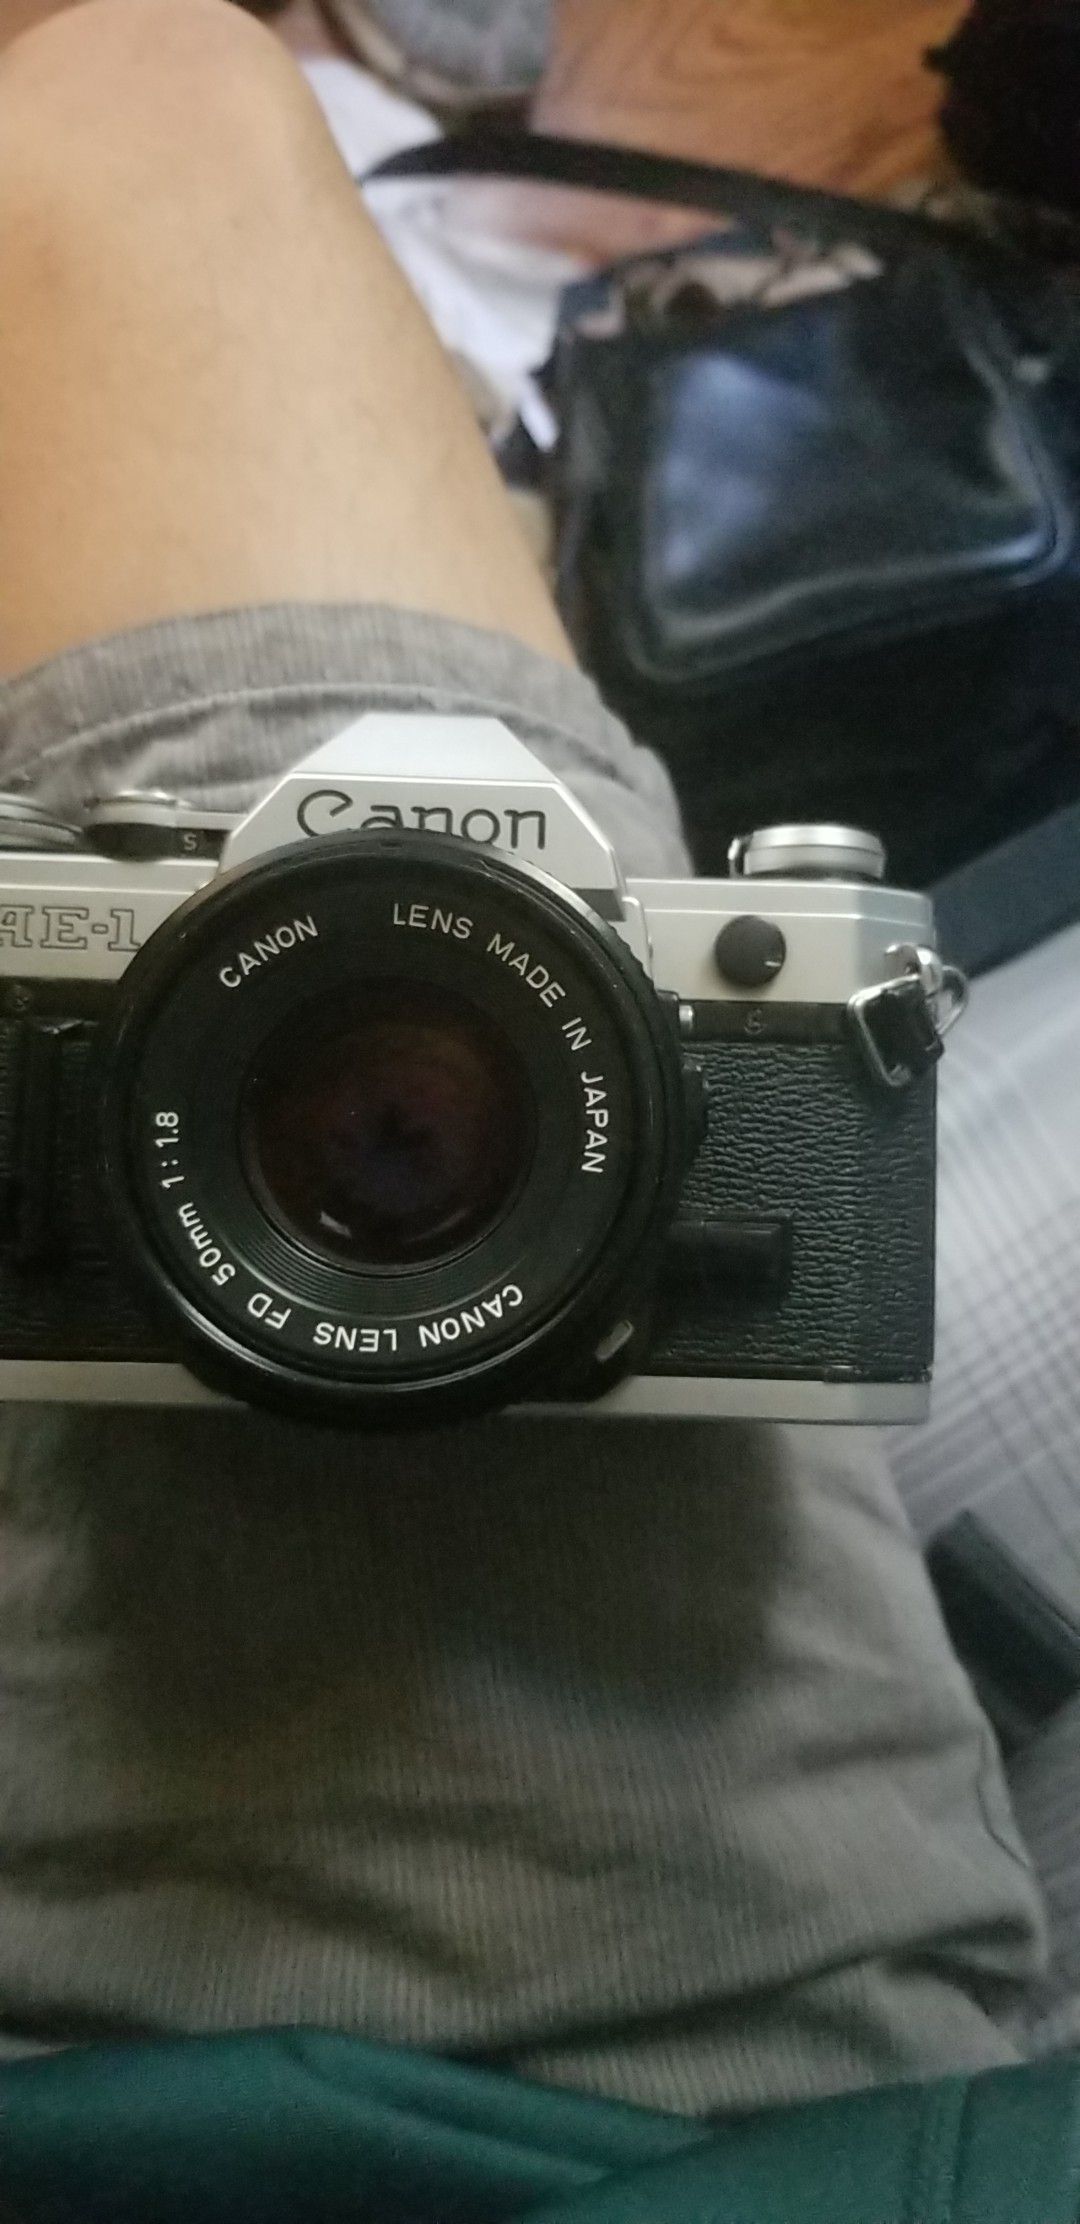 Canon AE-1 with lenses.